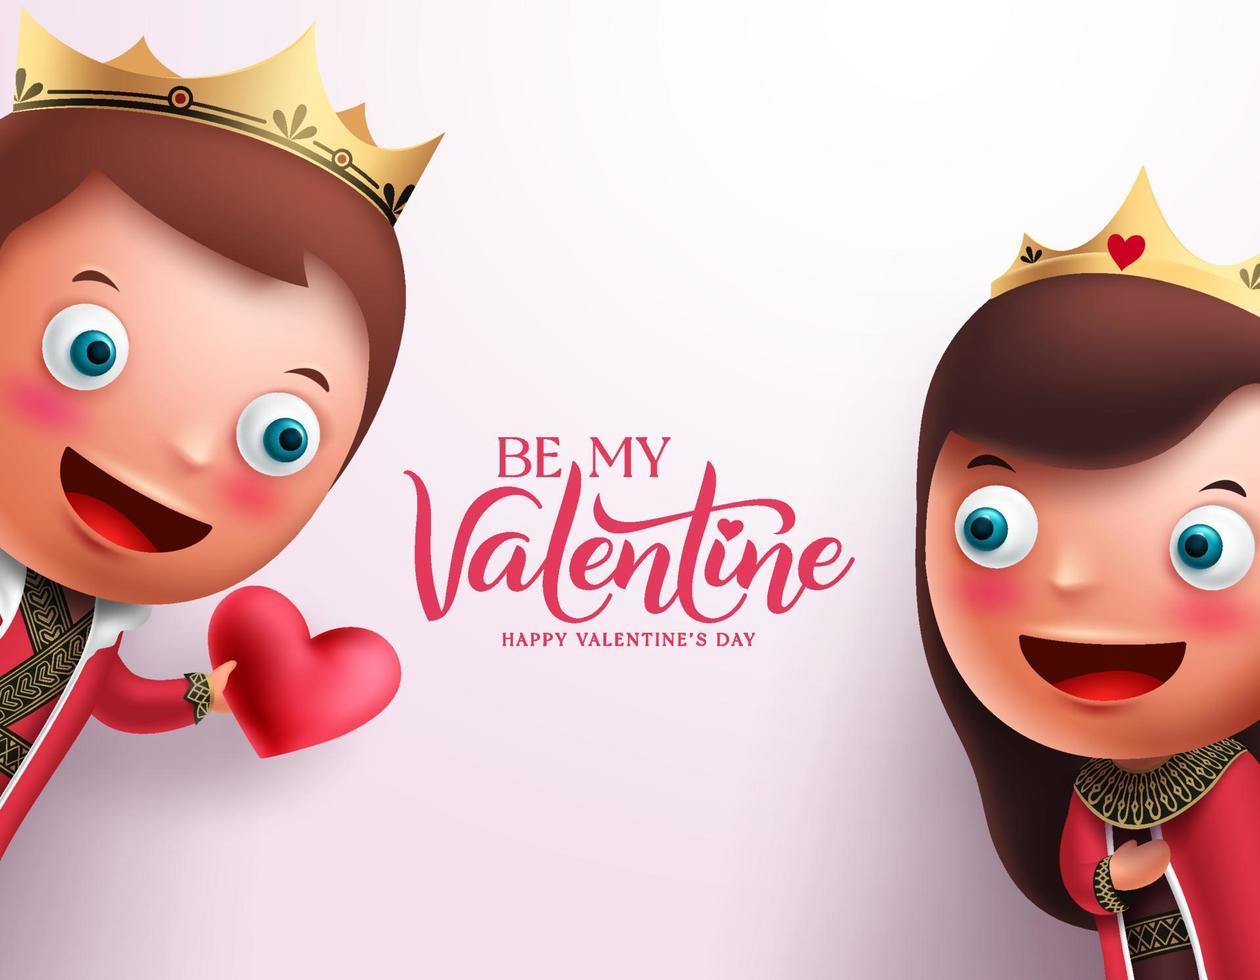 King and queen of hearts character vector design. Be my valentine text with couple character